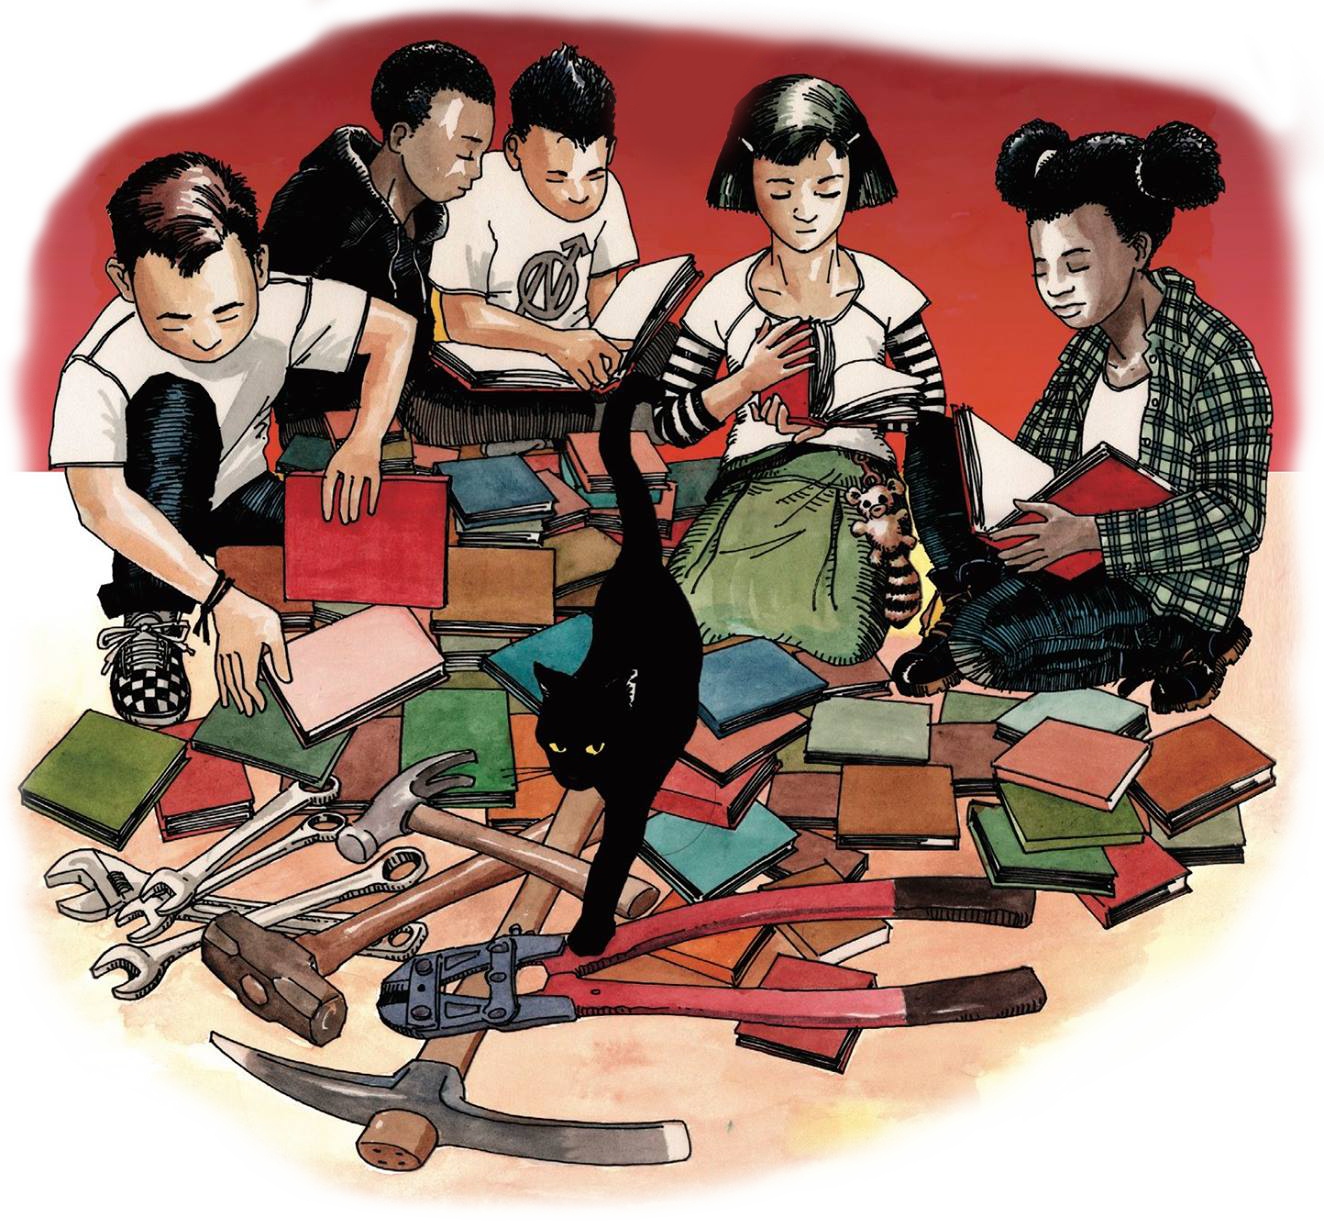 Five children, of different genders and ethnicities, sit around a pile of books and tools, reading together. A black cat walks definatly on top of the piled books. Illustration by Fernando Marti.